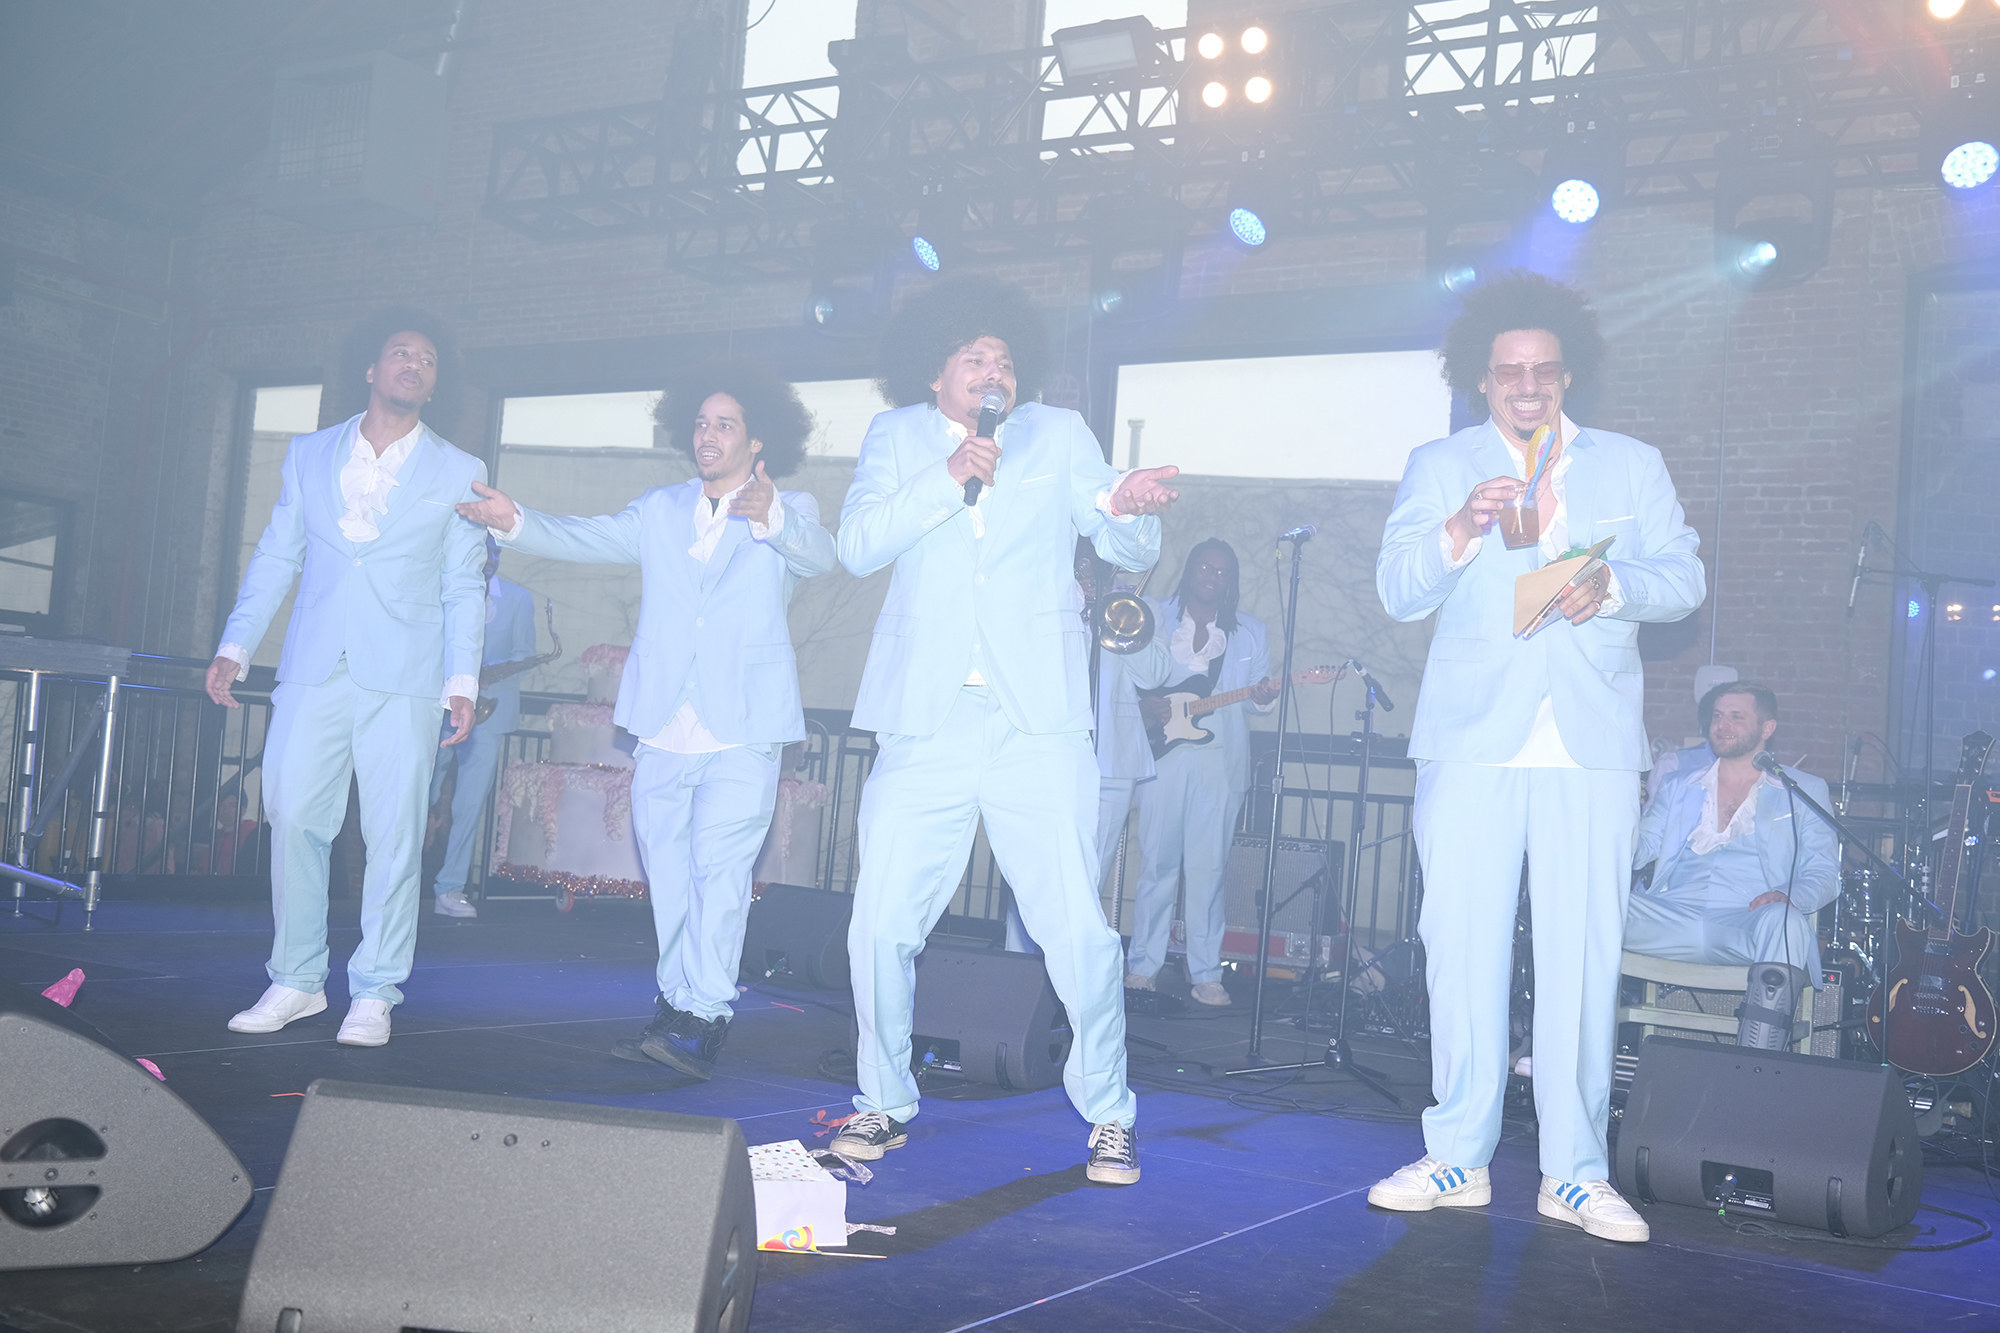 Eric André and several lookalikes stand together on stage